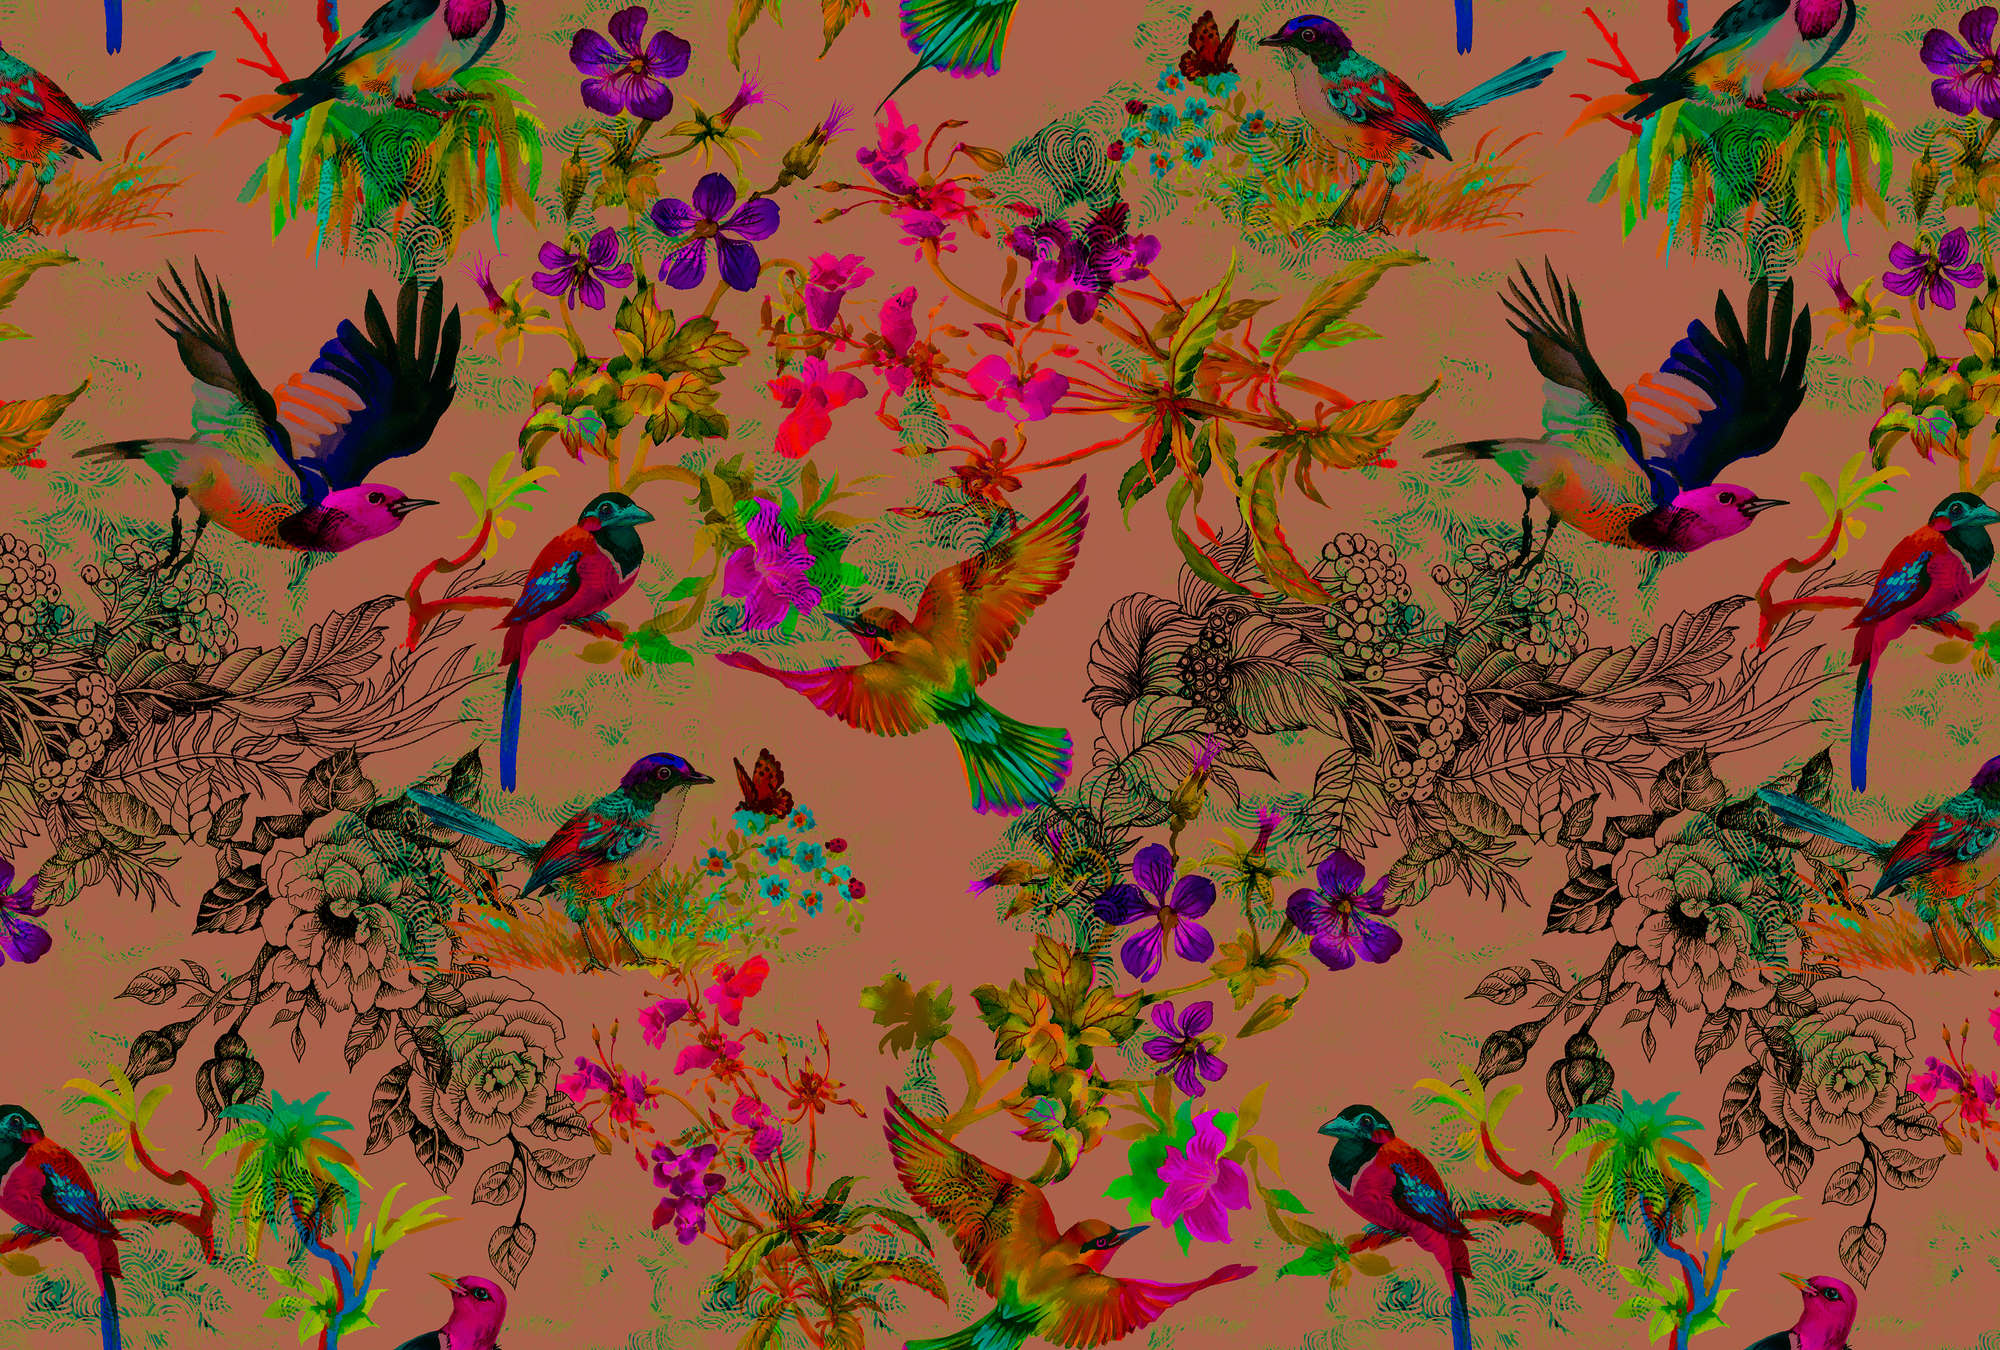             Bird mural in colourful collage style - Colorful, Brown
        